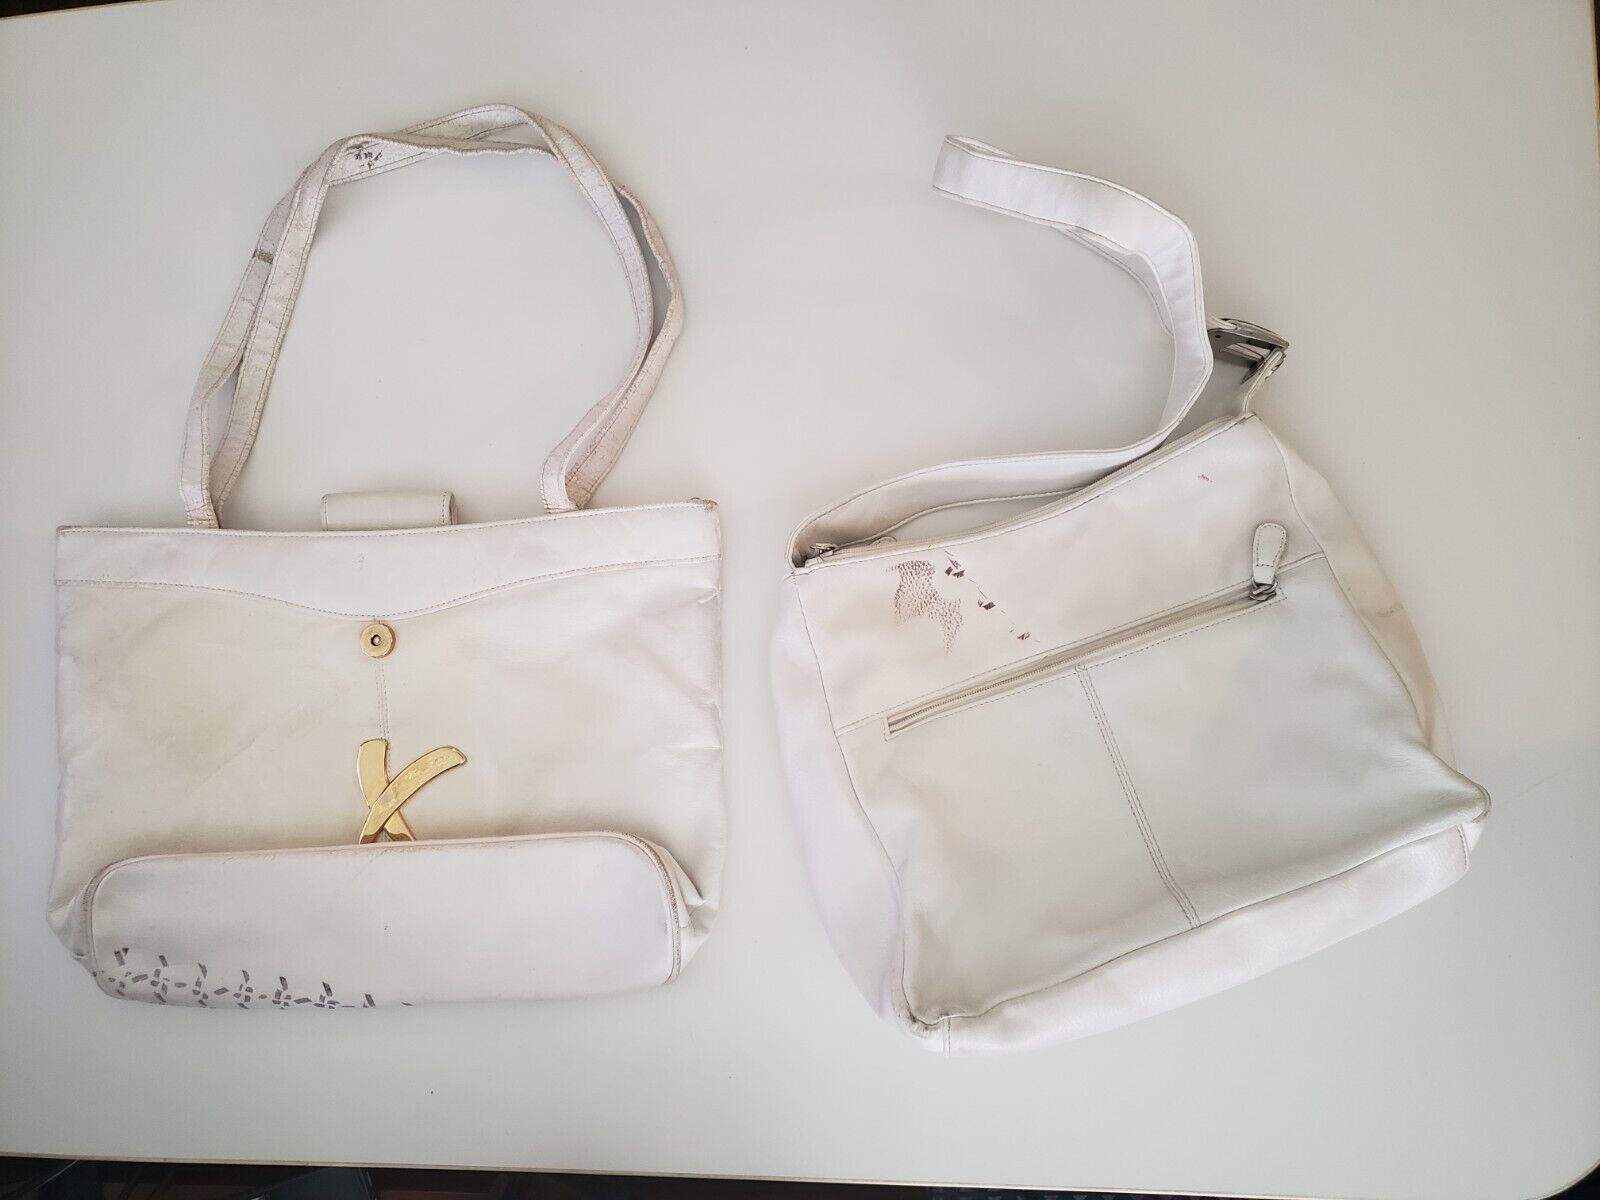 Pair of Used White Leather Purses Shoulder Handbags- Dress up, Costume, Upcycle